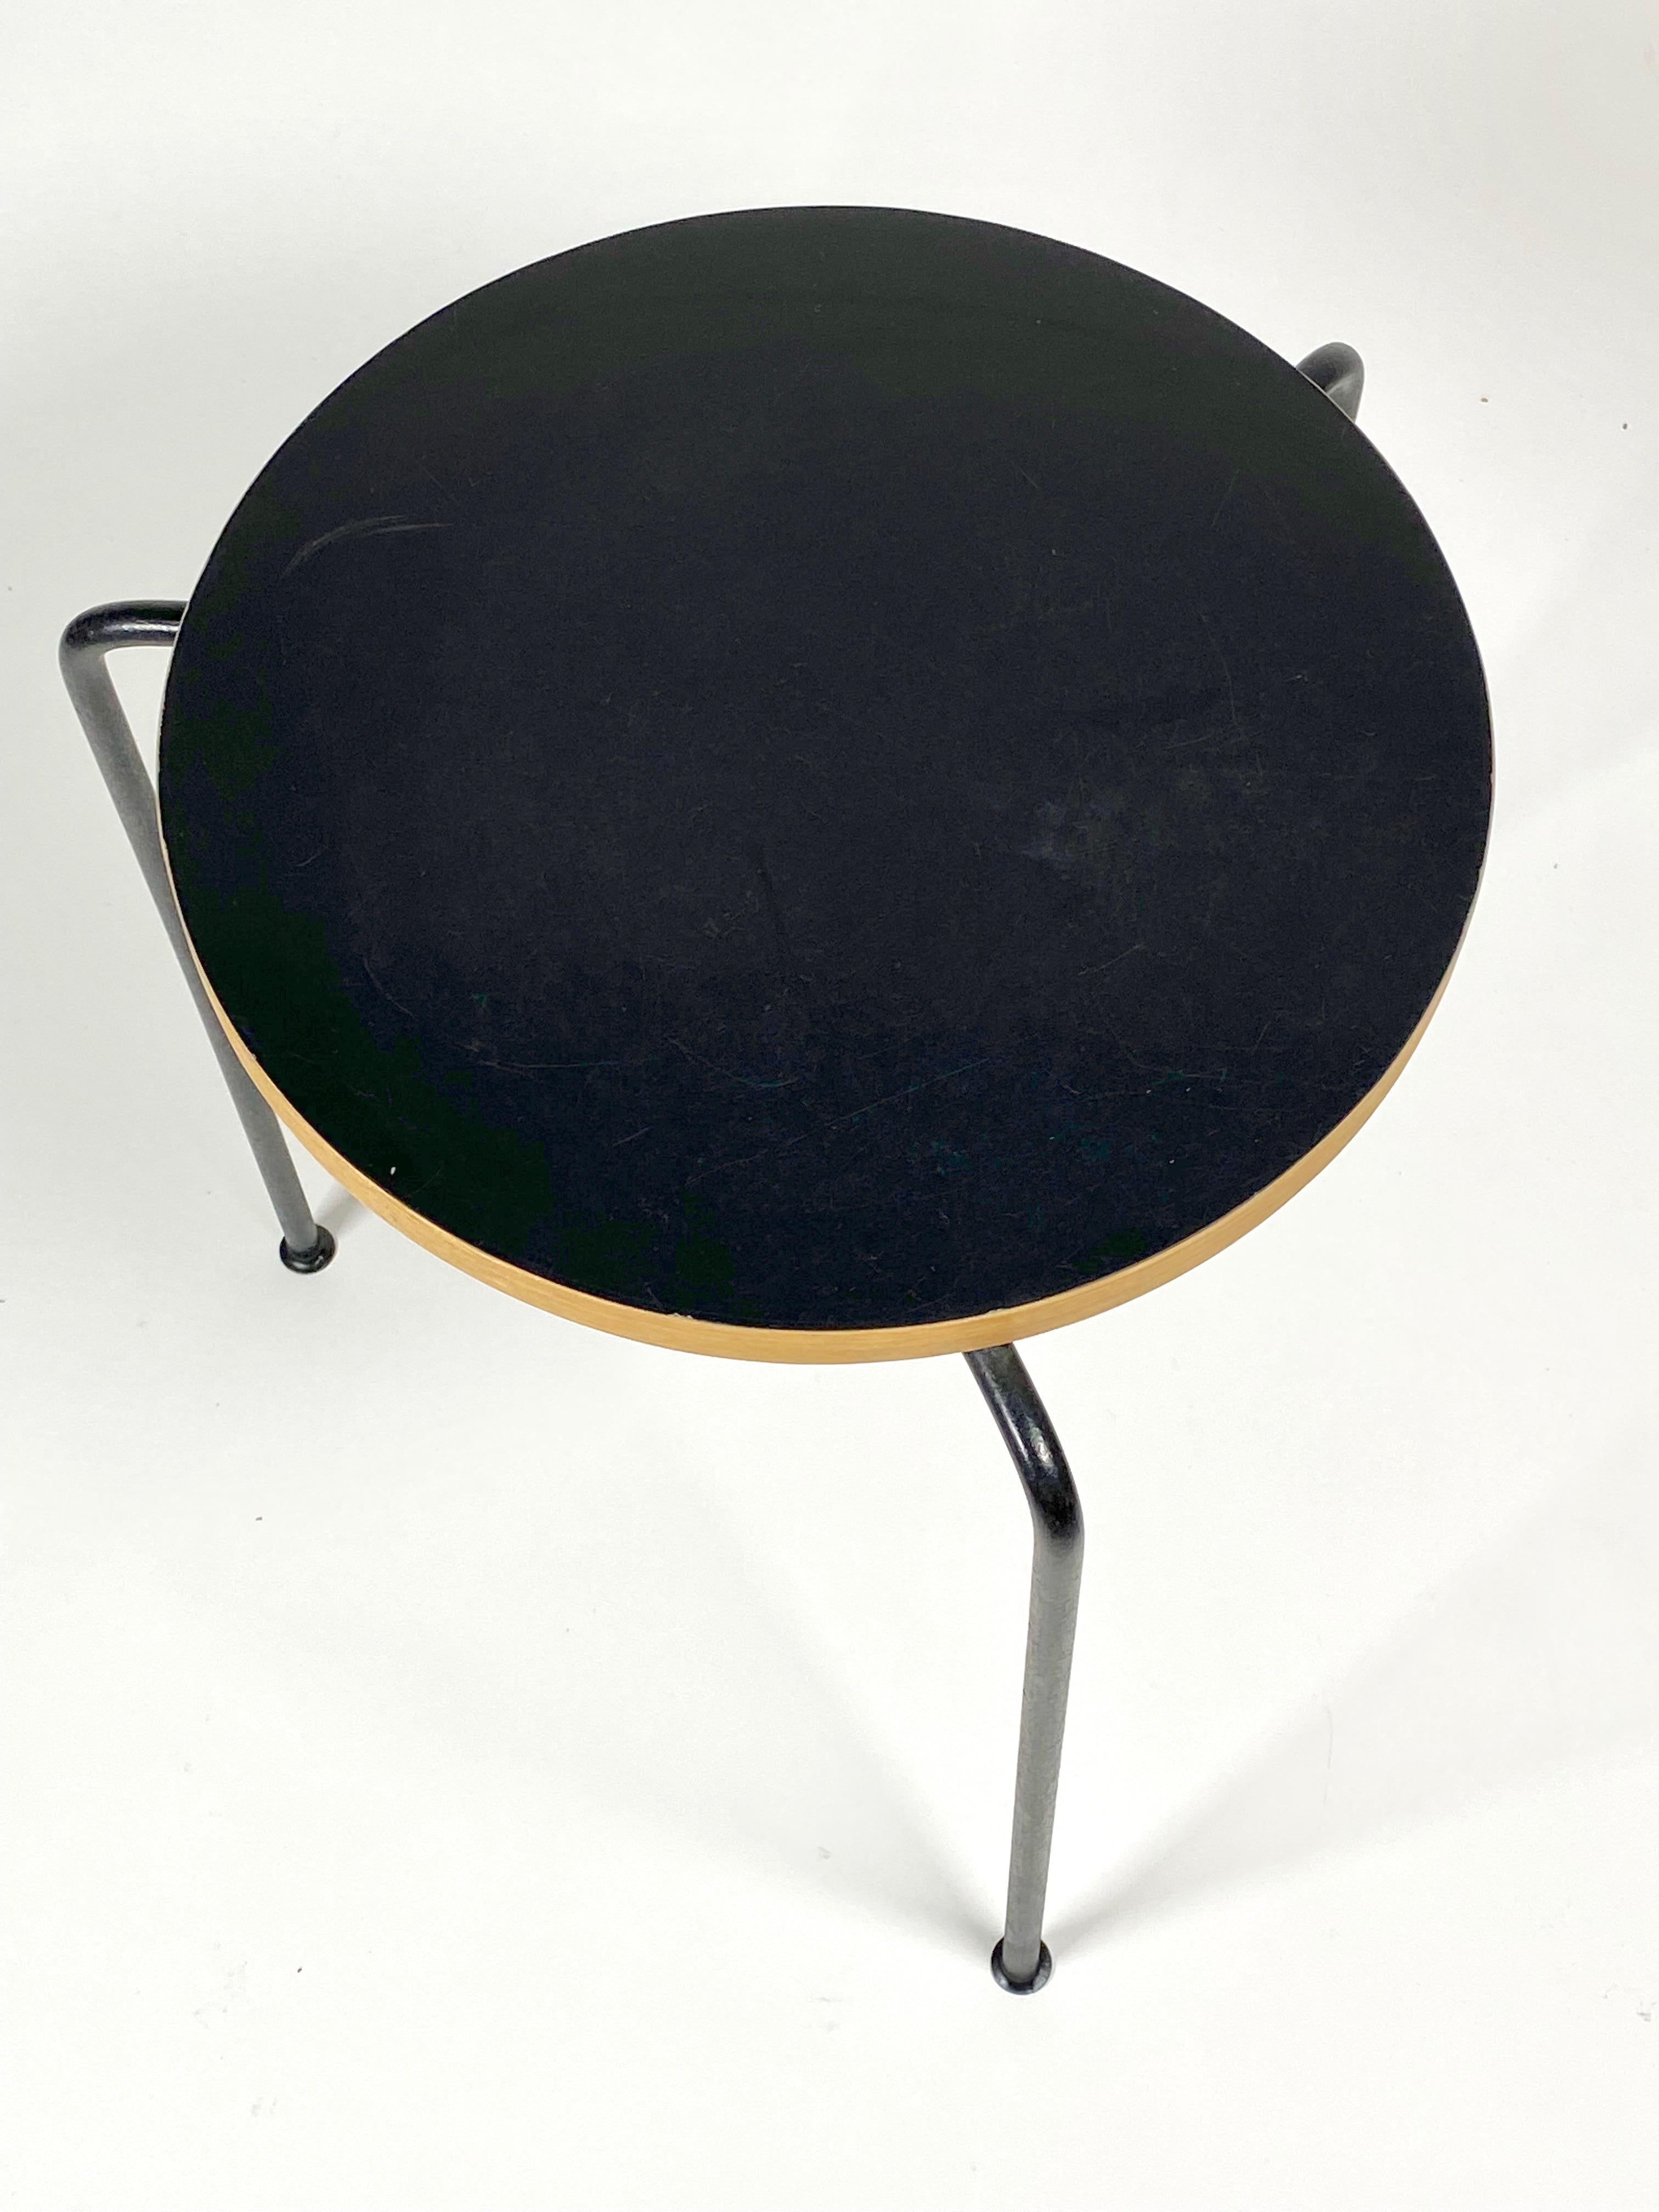 Mid-Century Modern California Modernist Design Stool Attributed to Bay Area Designer Luther Conover